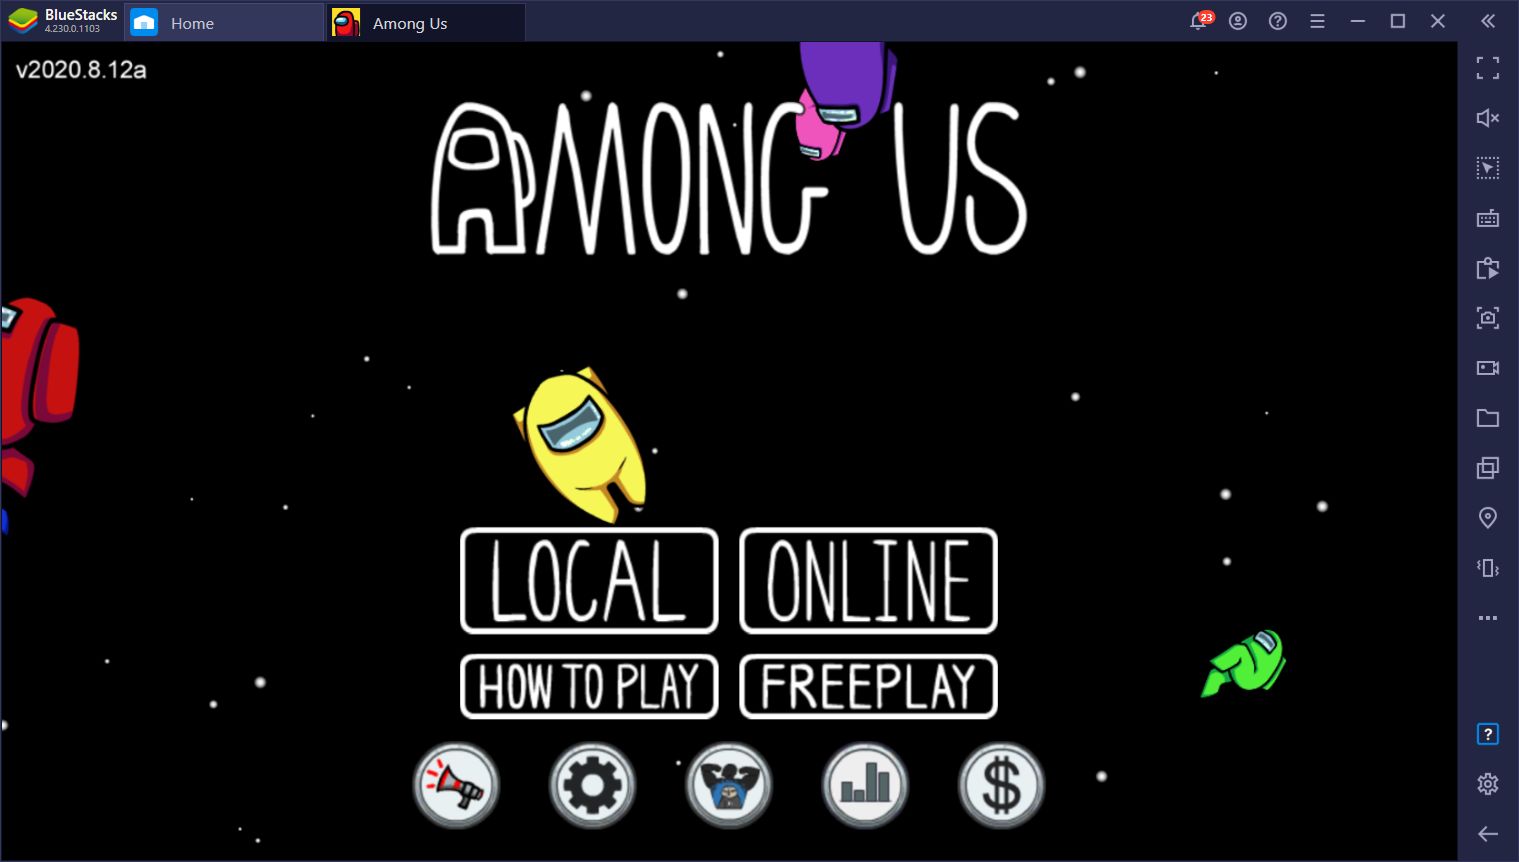 AMONG US: ONLINE EDITION free online game on